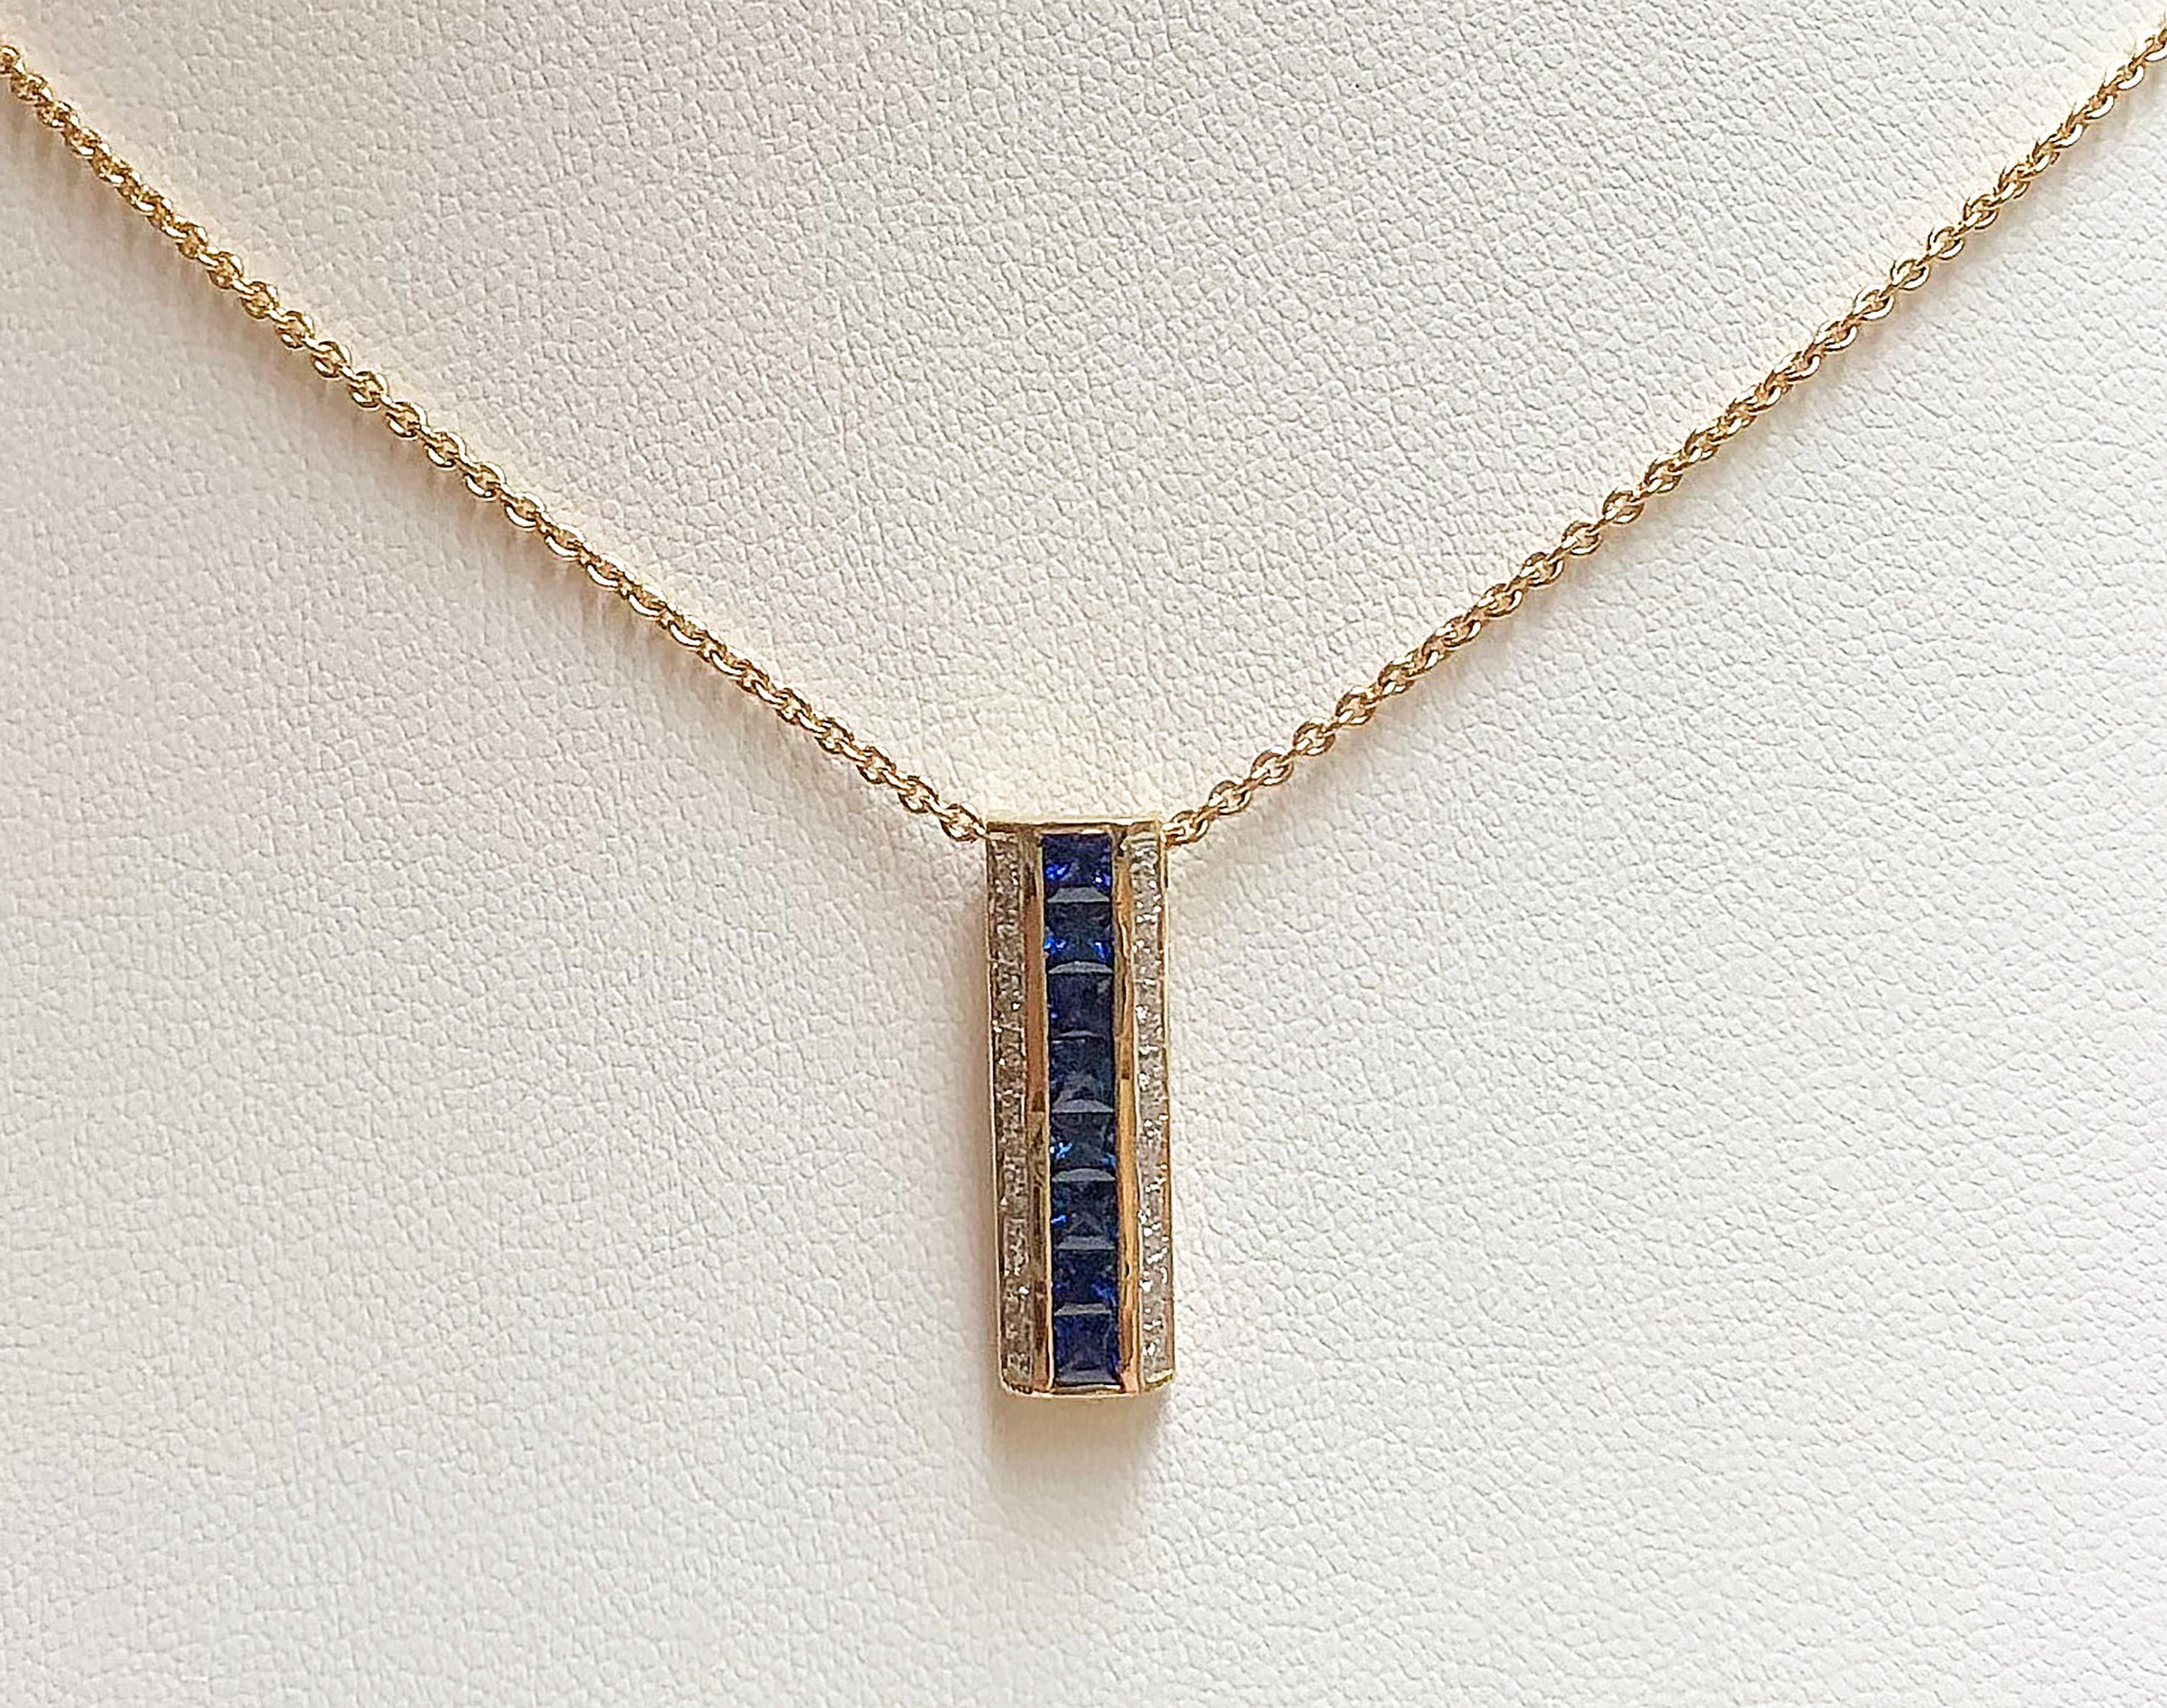 Blue Sapphire 0.96 carat with Diamond 0.16 carat Pendant set in 18 Karat Gold Settings
(chain not included)

Width:  0.6 cm 
Length: 2.2 cm
Total Weight: 2.63 grams

